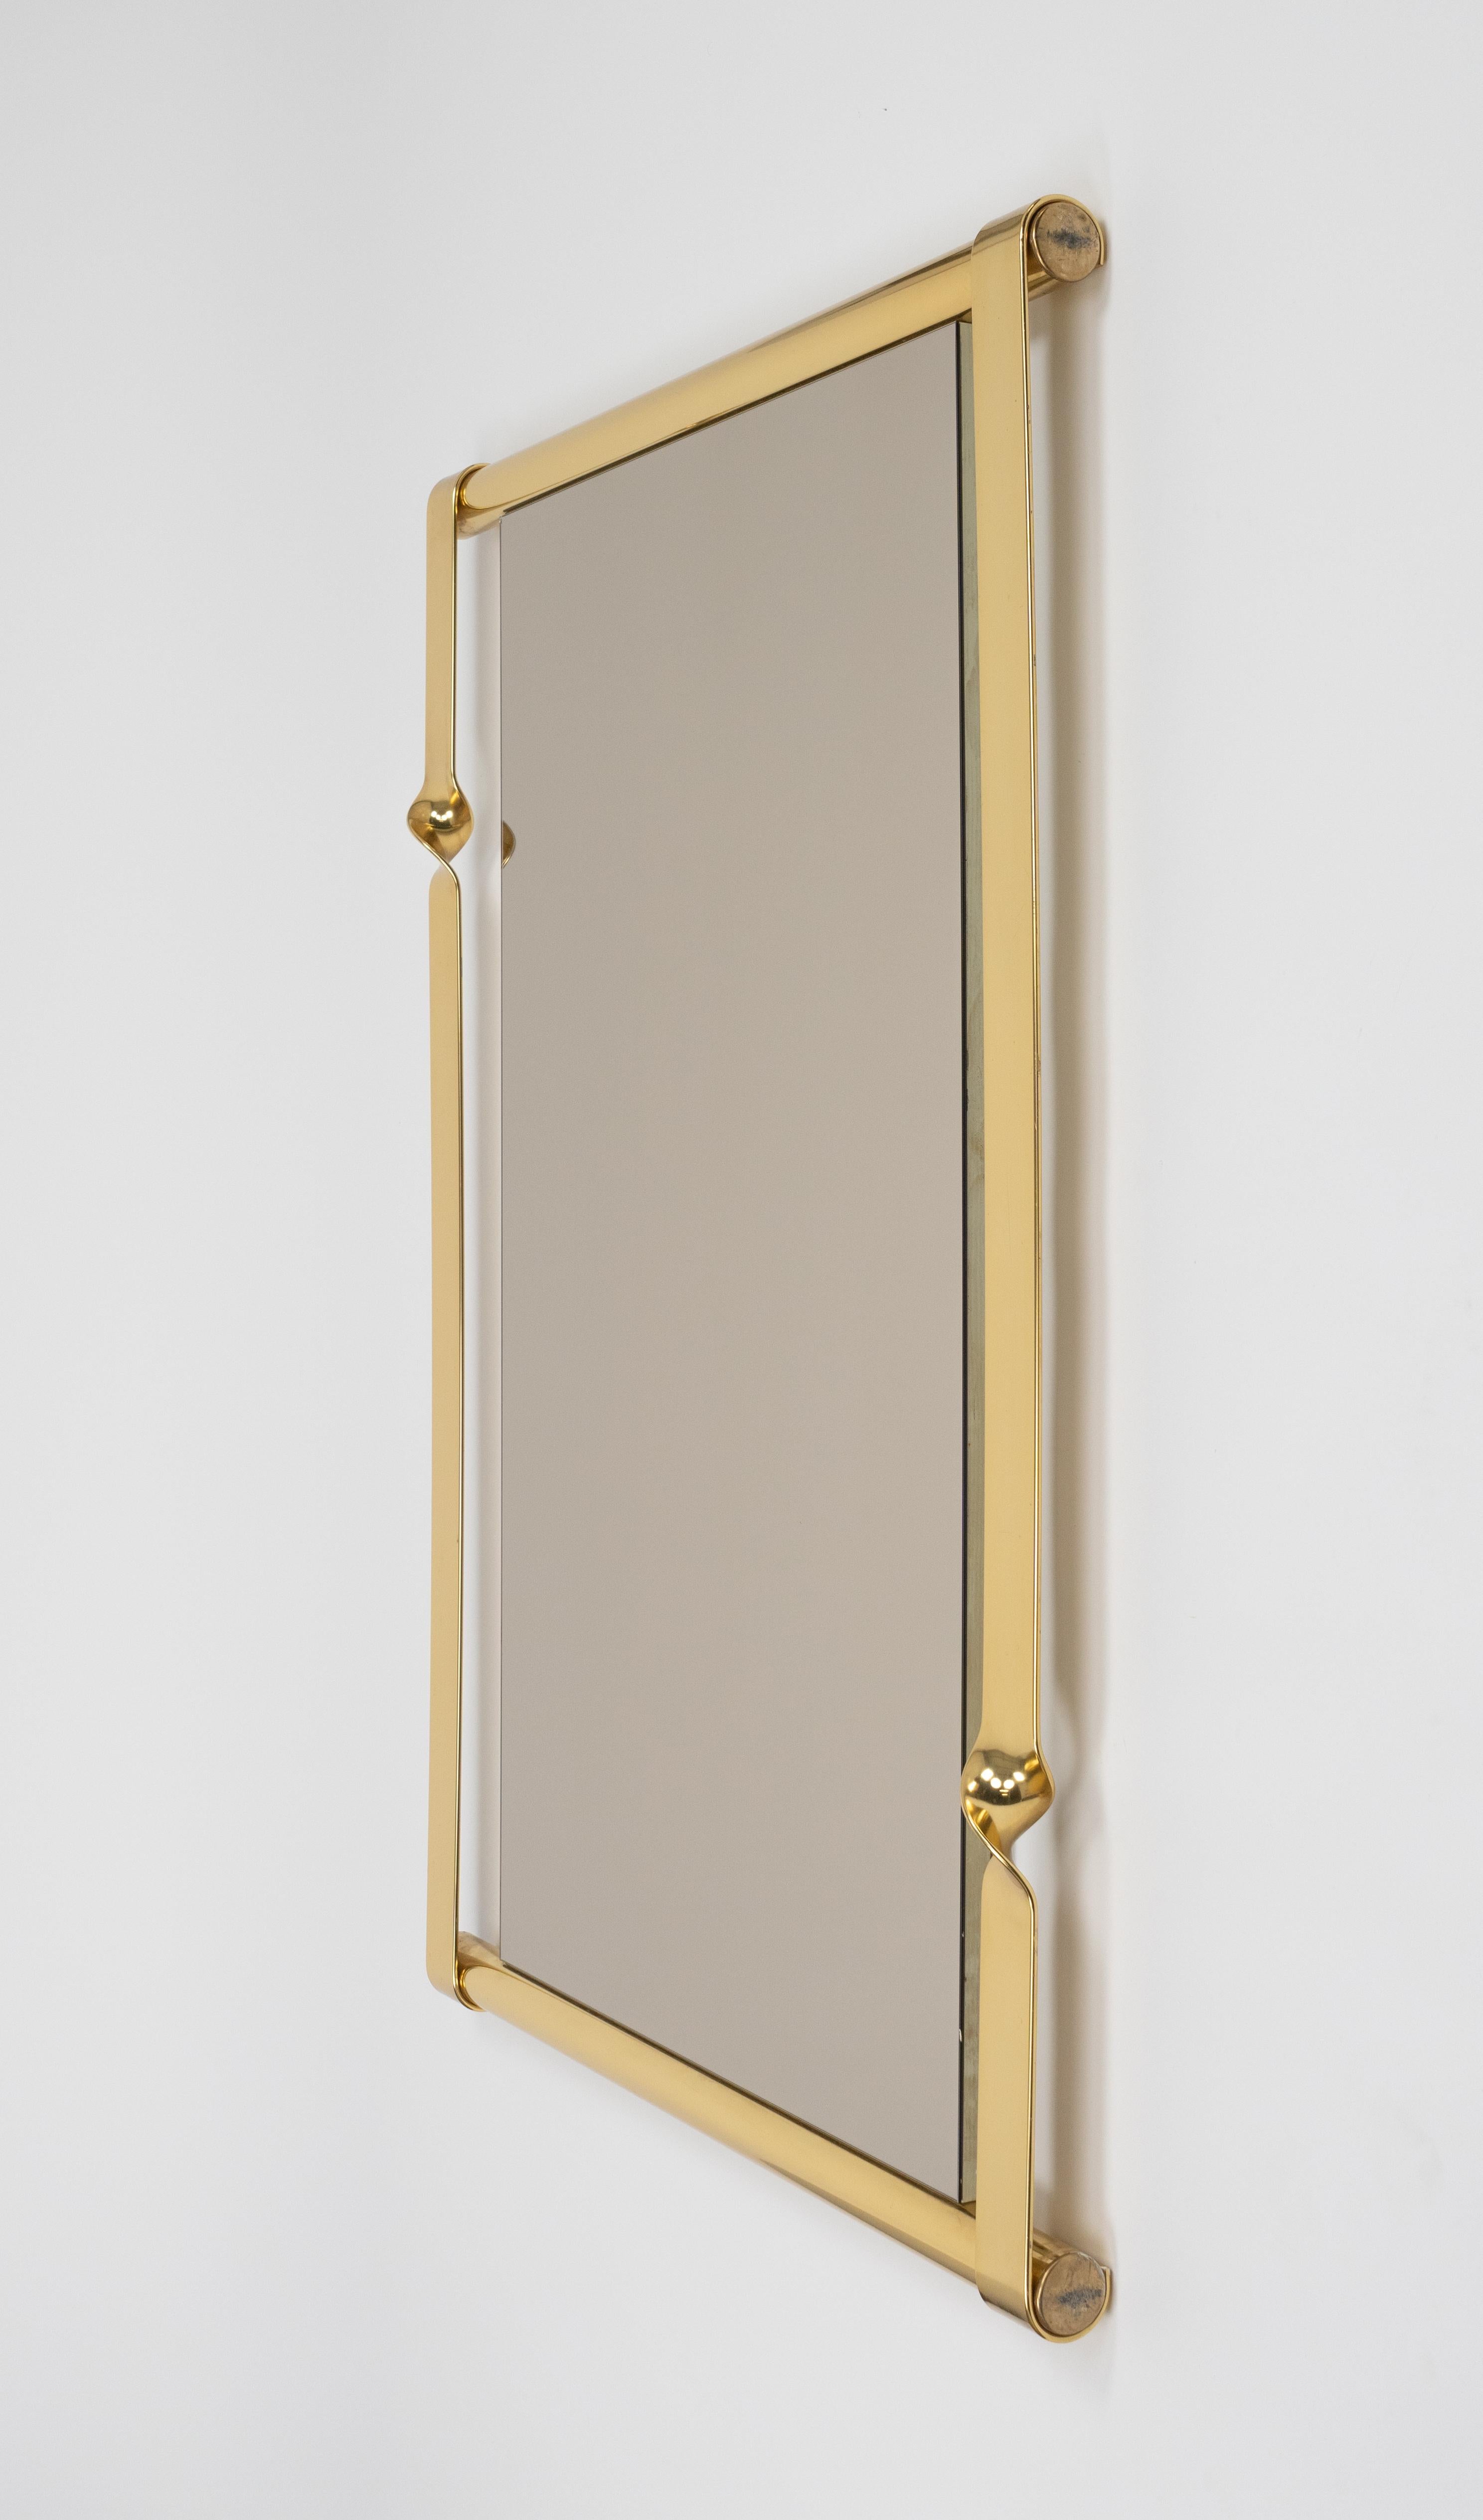 Midecentury amazing rectangular large wall mirror in brass and slightly bronze tinted mirror by Luciano Frigerio.

Made in Italy in the 1970s.

The rectangular shape of the mirror with a twisted metal frame classic and timeless look that complements